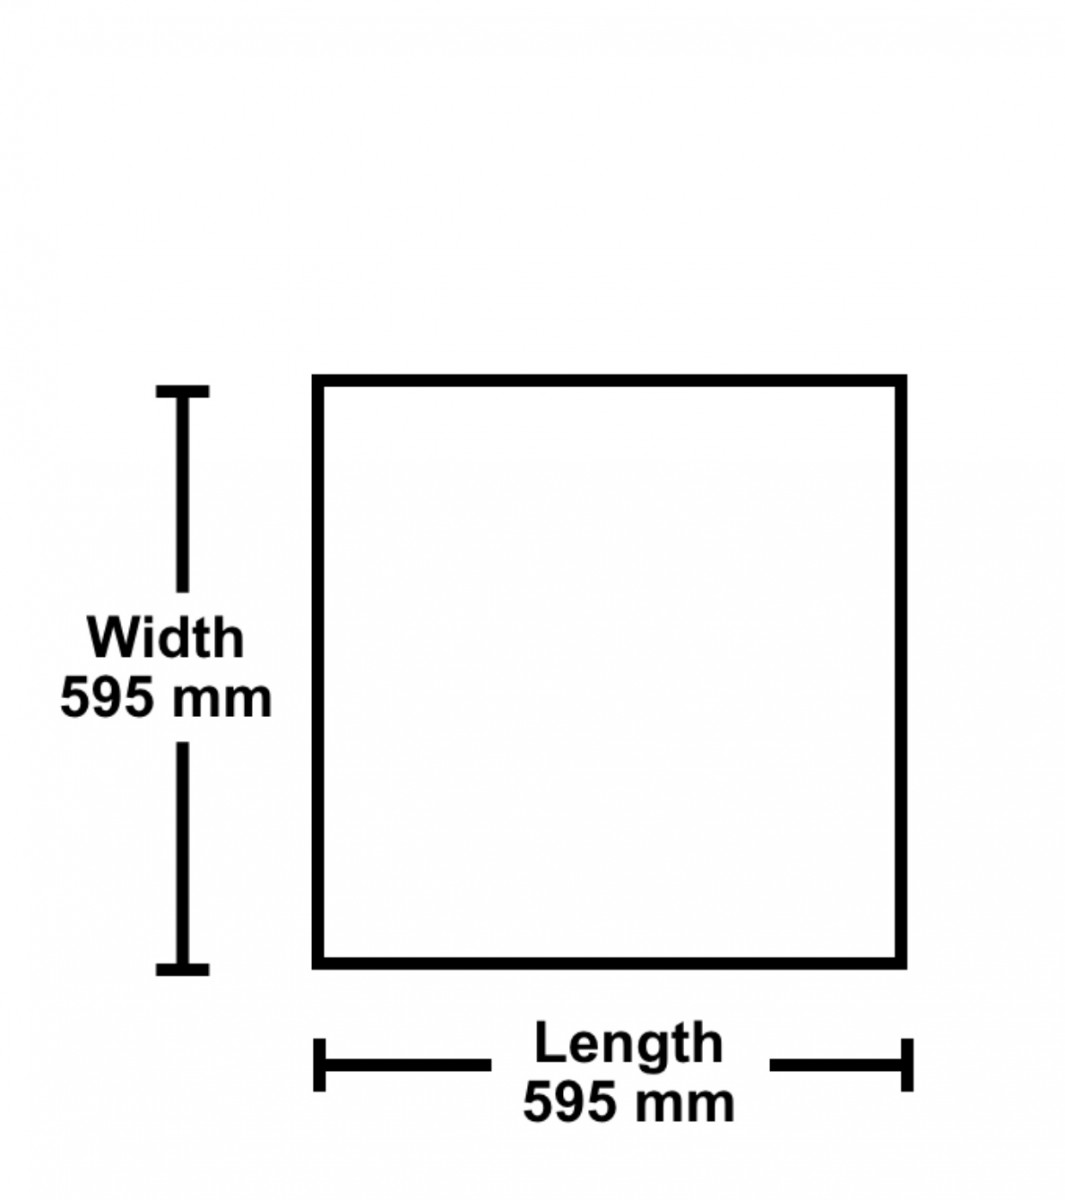 Diagram of a Ceiling Tile Size Width 595mm by Length 595mm